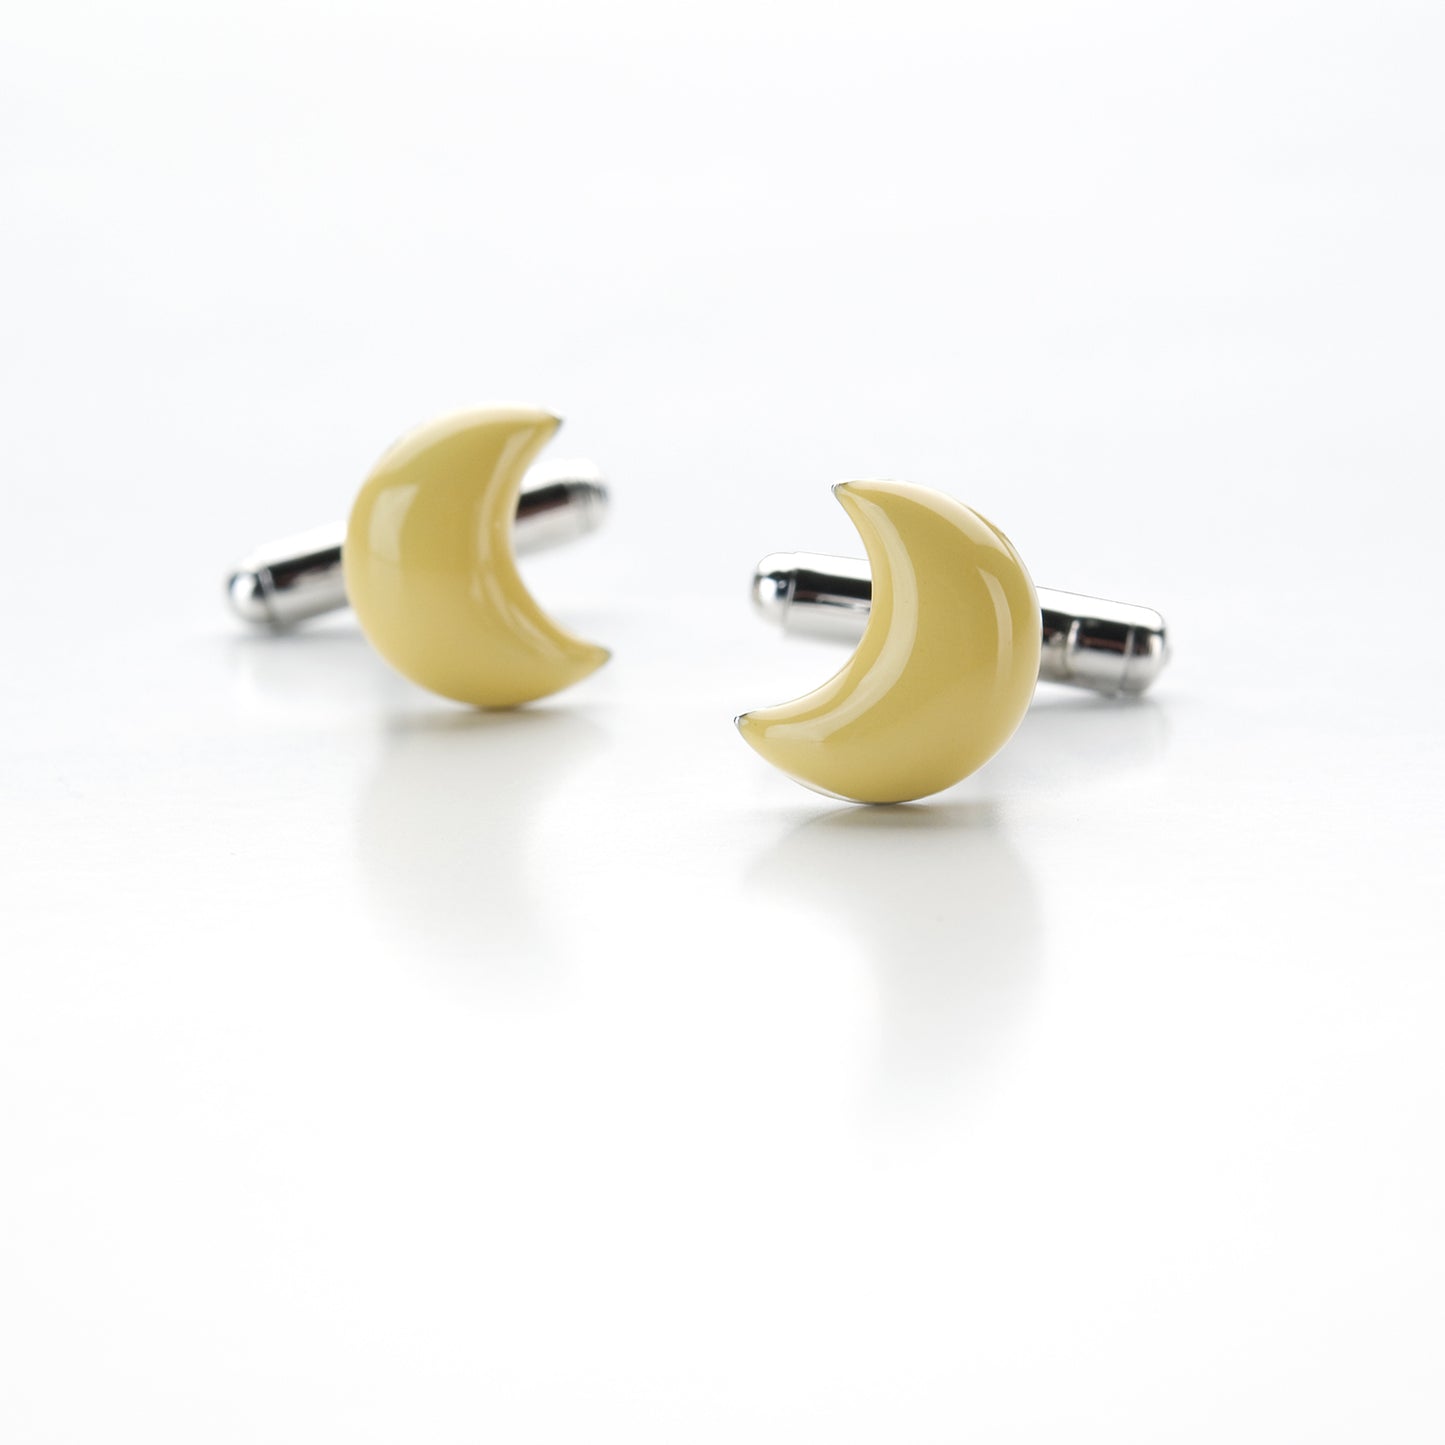 Crescent moon cufflinks in silver and yellow enamel